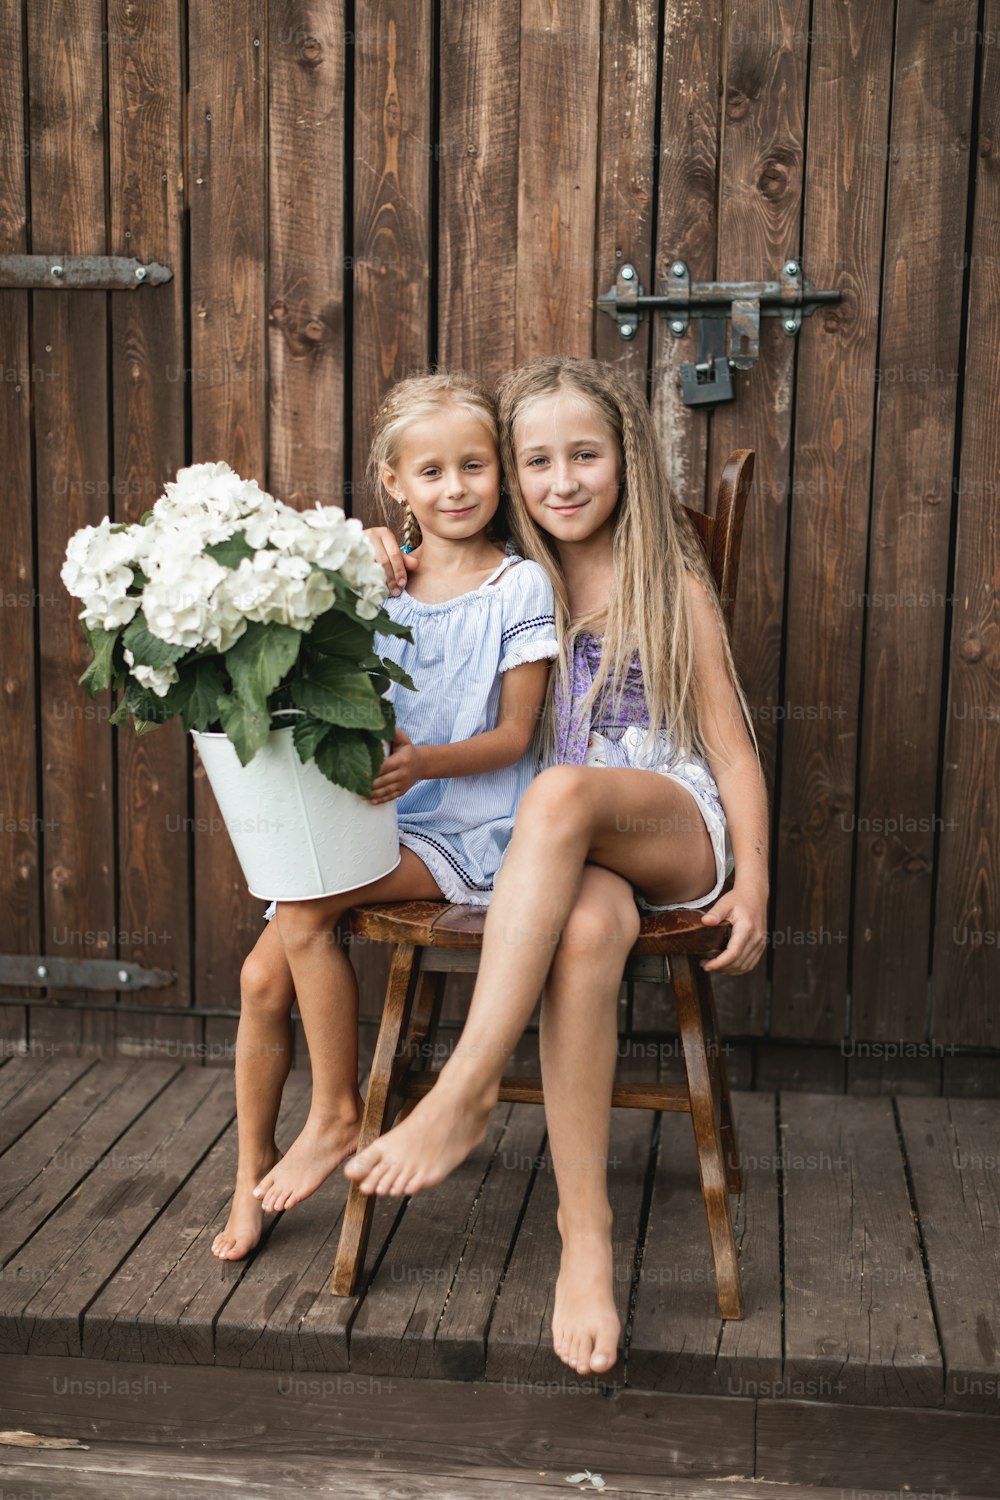 Two happy blond hair girls, sisters or friends, sitting together on the wooden chair near the old wooden barn outdoors, and holding flowers bouquet, white hydrangea in bucket.